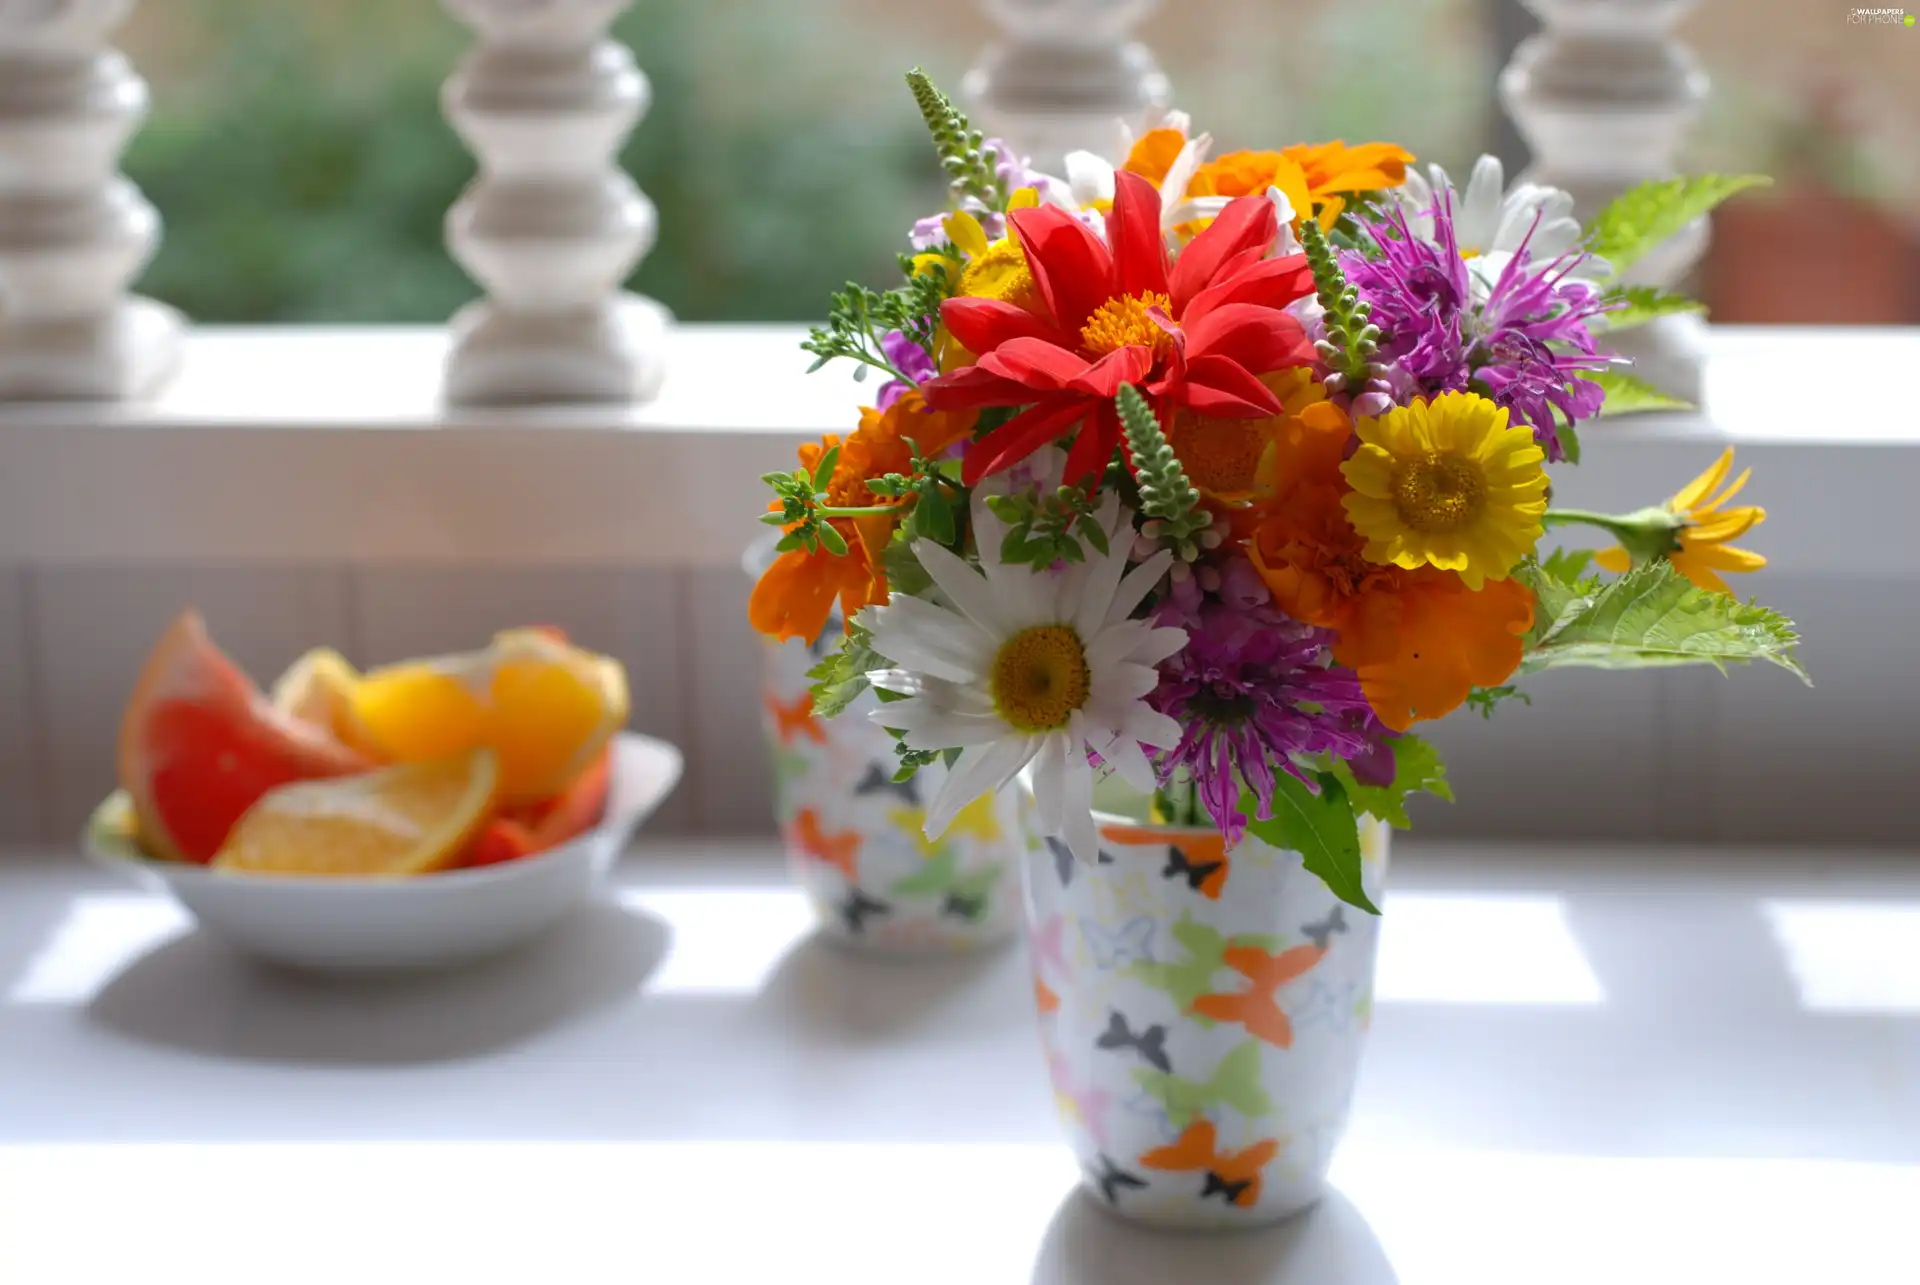 small bunch, ##, vase, flowers